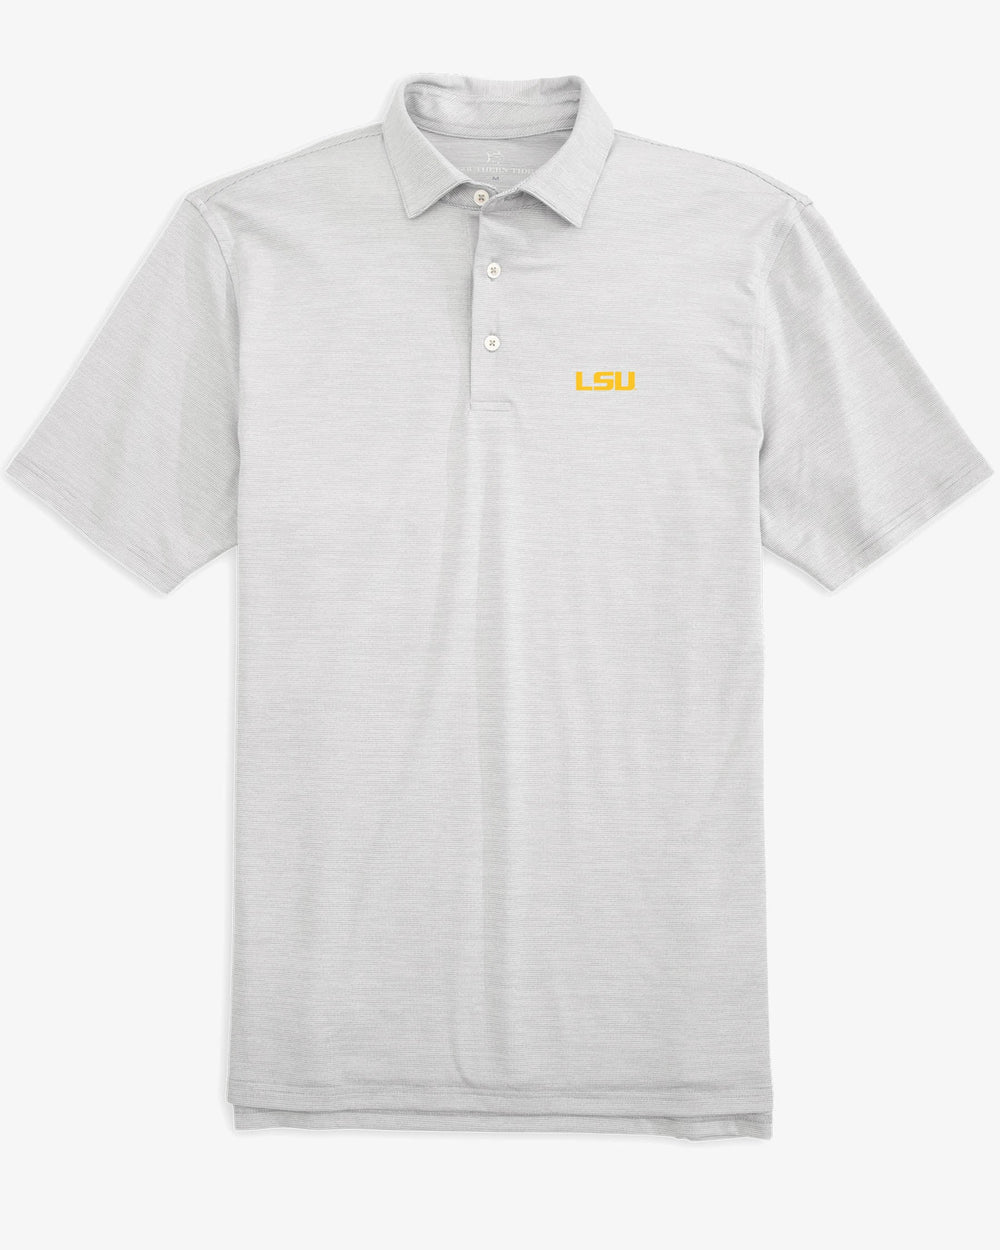 The front view of the LSU Tigers Driver Spacedye Polo Shirt by Southern Tide - Slate Grey